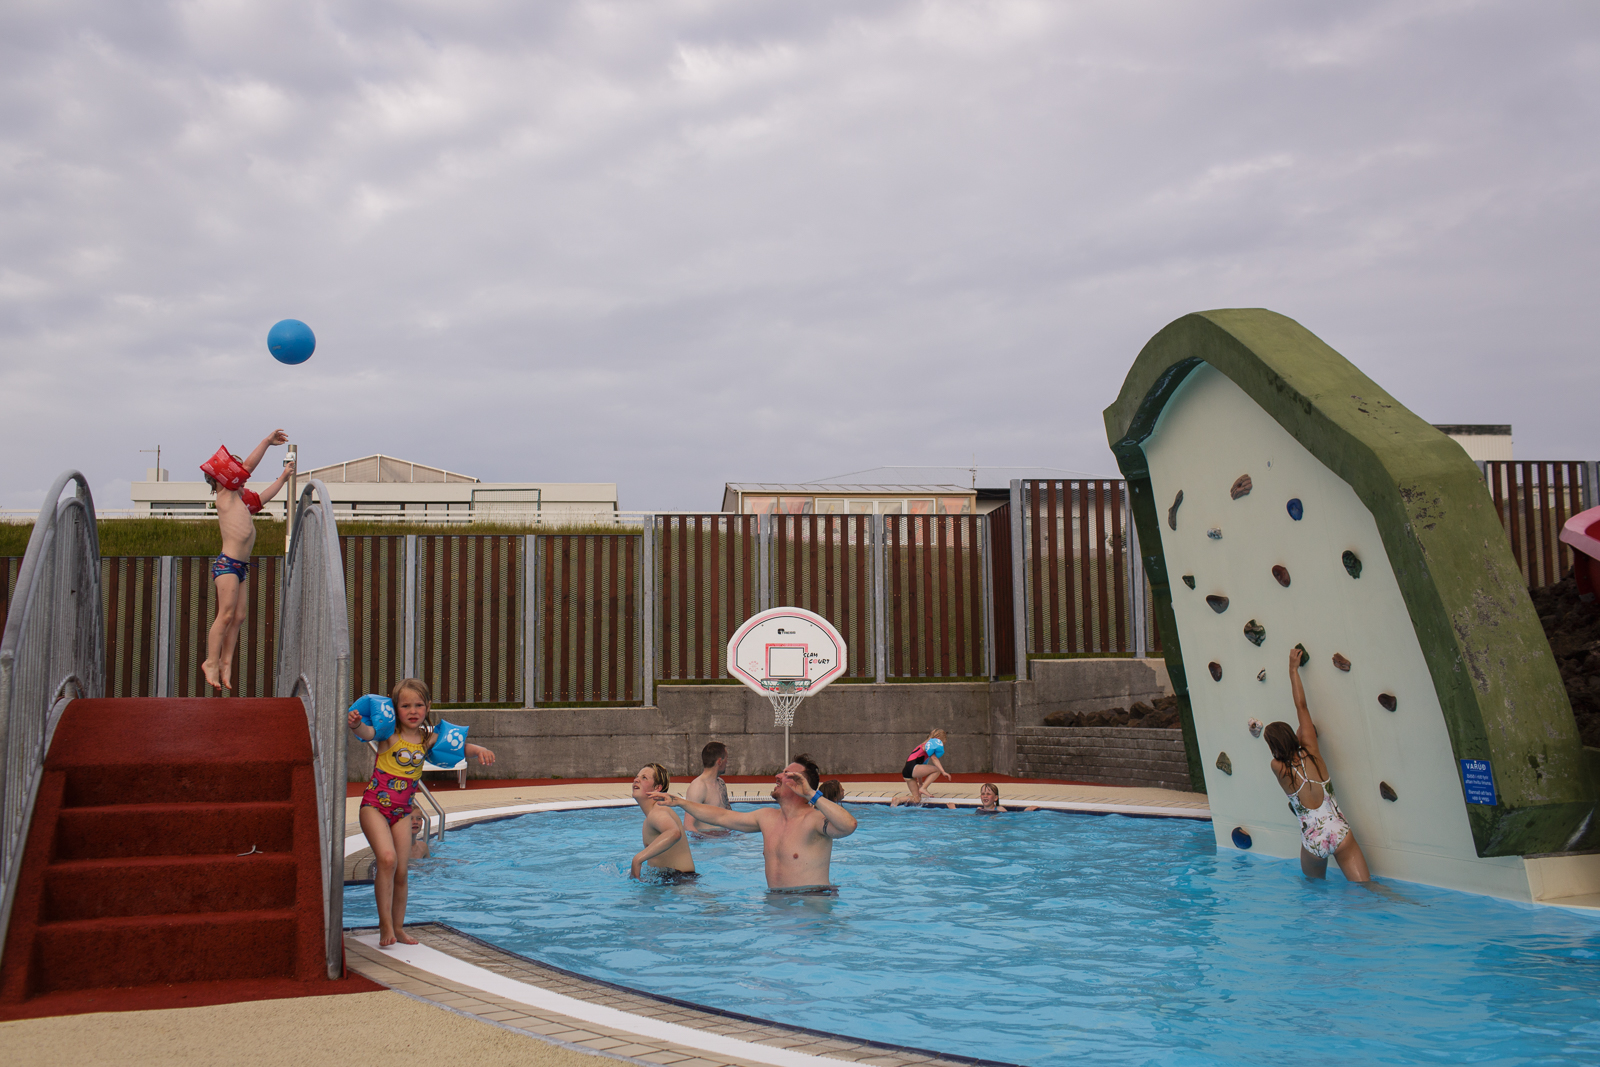  People enjoy the public pool in Heimaey, an island in the Vestmannaeyjar Archipelago off the southern coast of Iceland. 